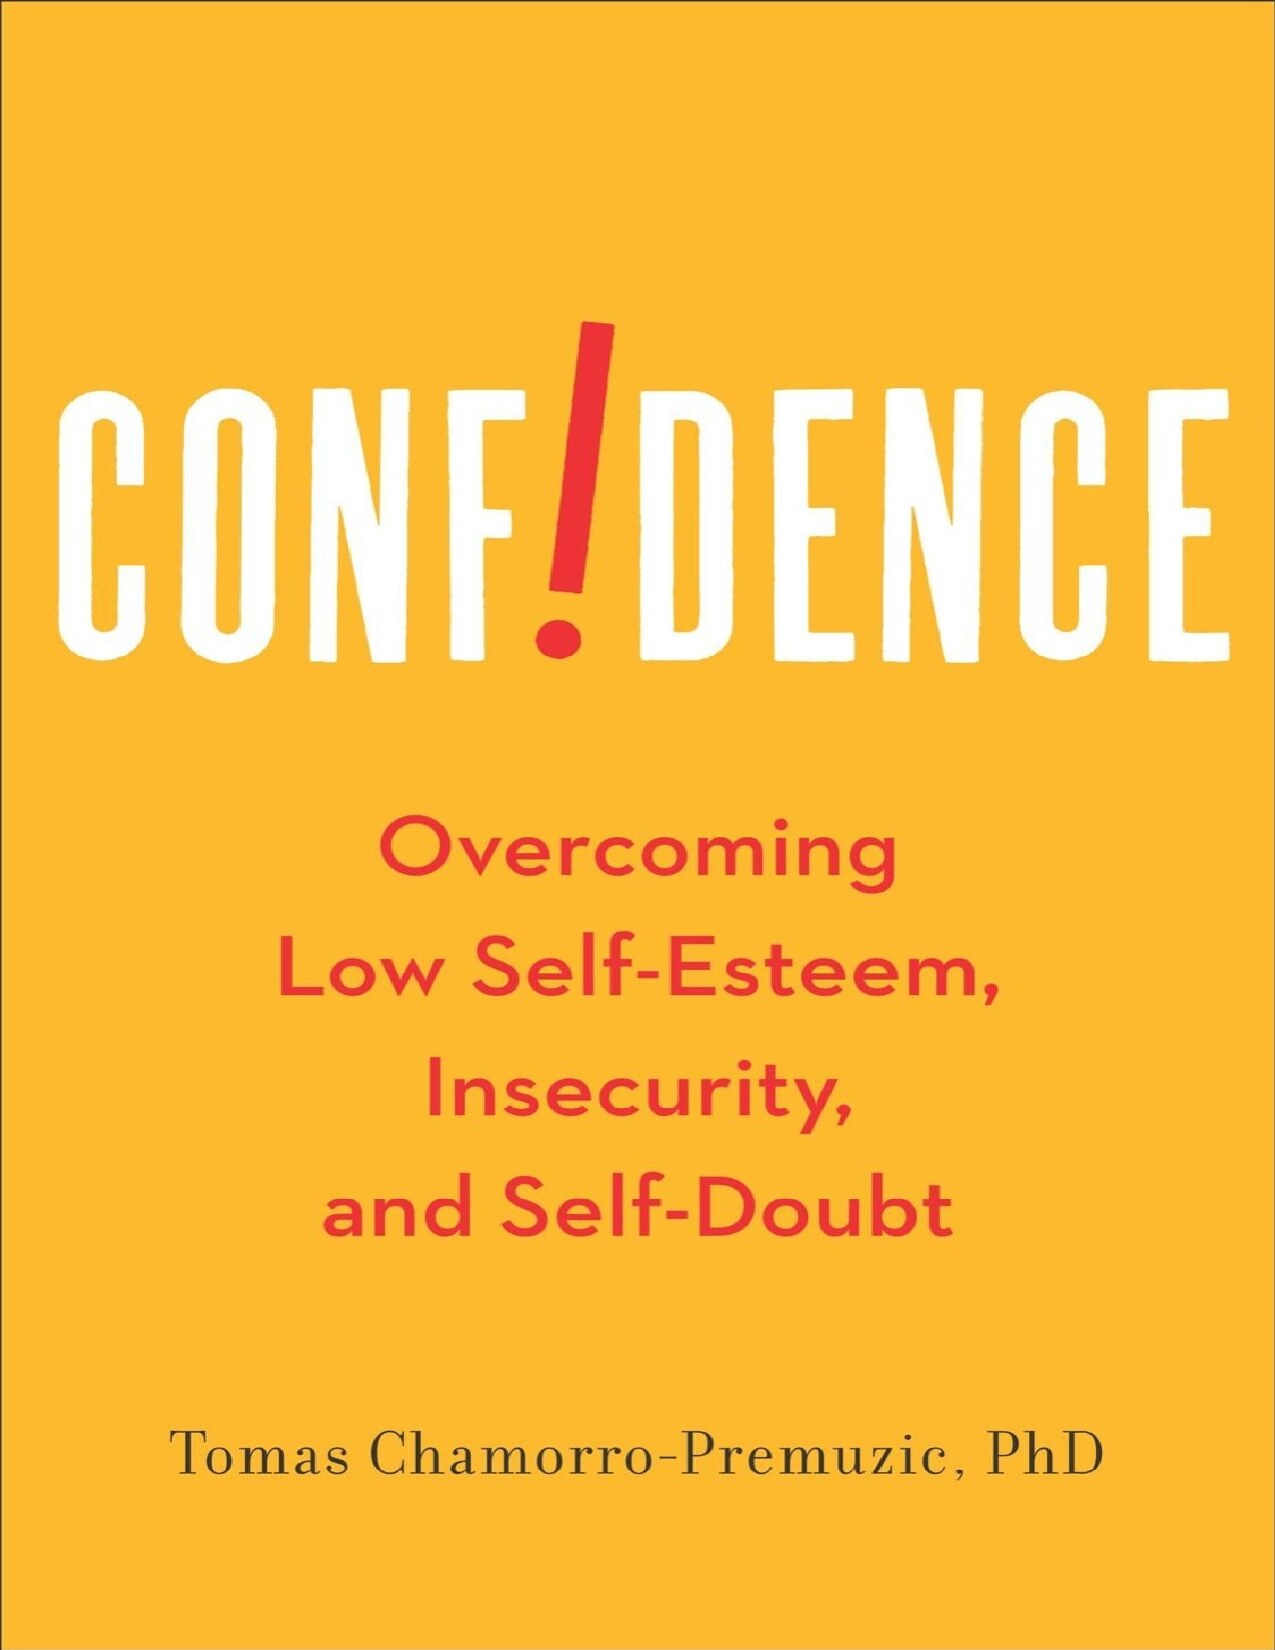 Confidence: Overcoming Low Self-Esteem, Insecurity, and Self-Doubt - PDFDrive.com